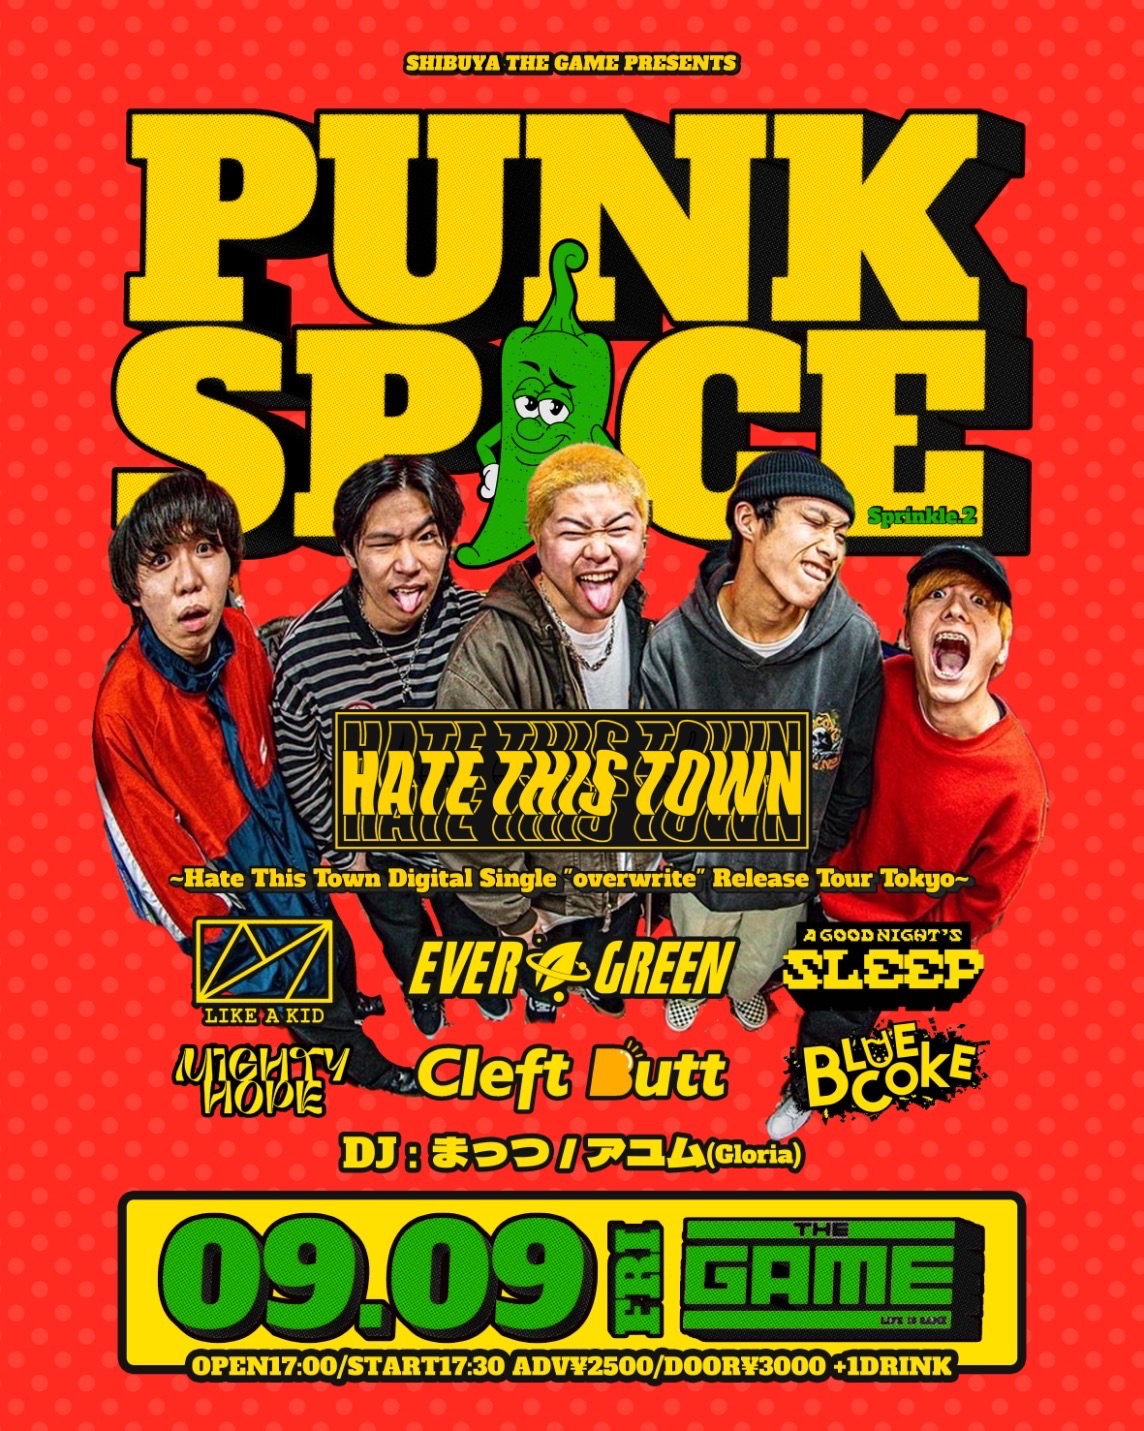 『PUNKSPICE』 Sprinkle.2 ~Hate This Town Digital Single "overwrite" Release Tour Tokyo~